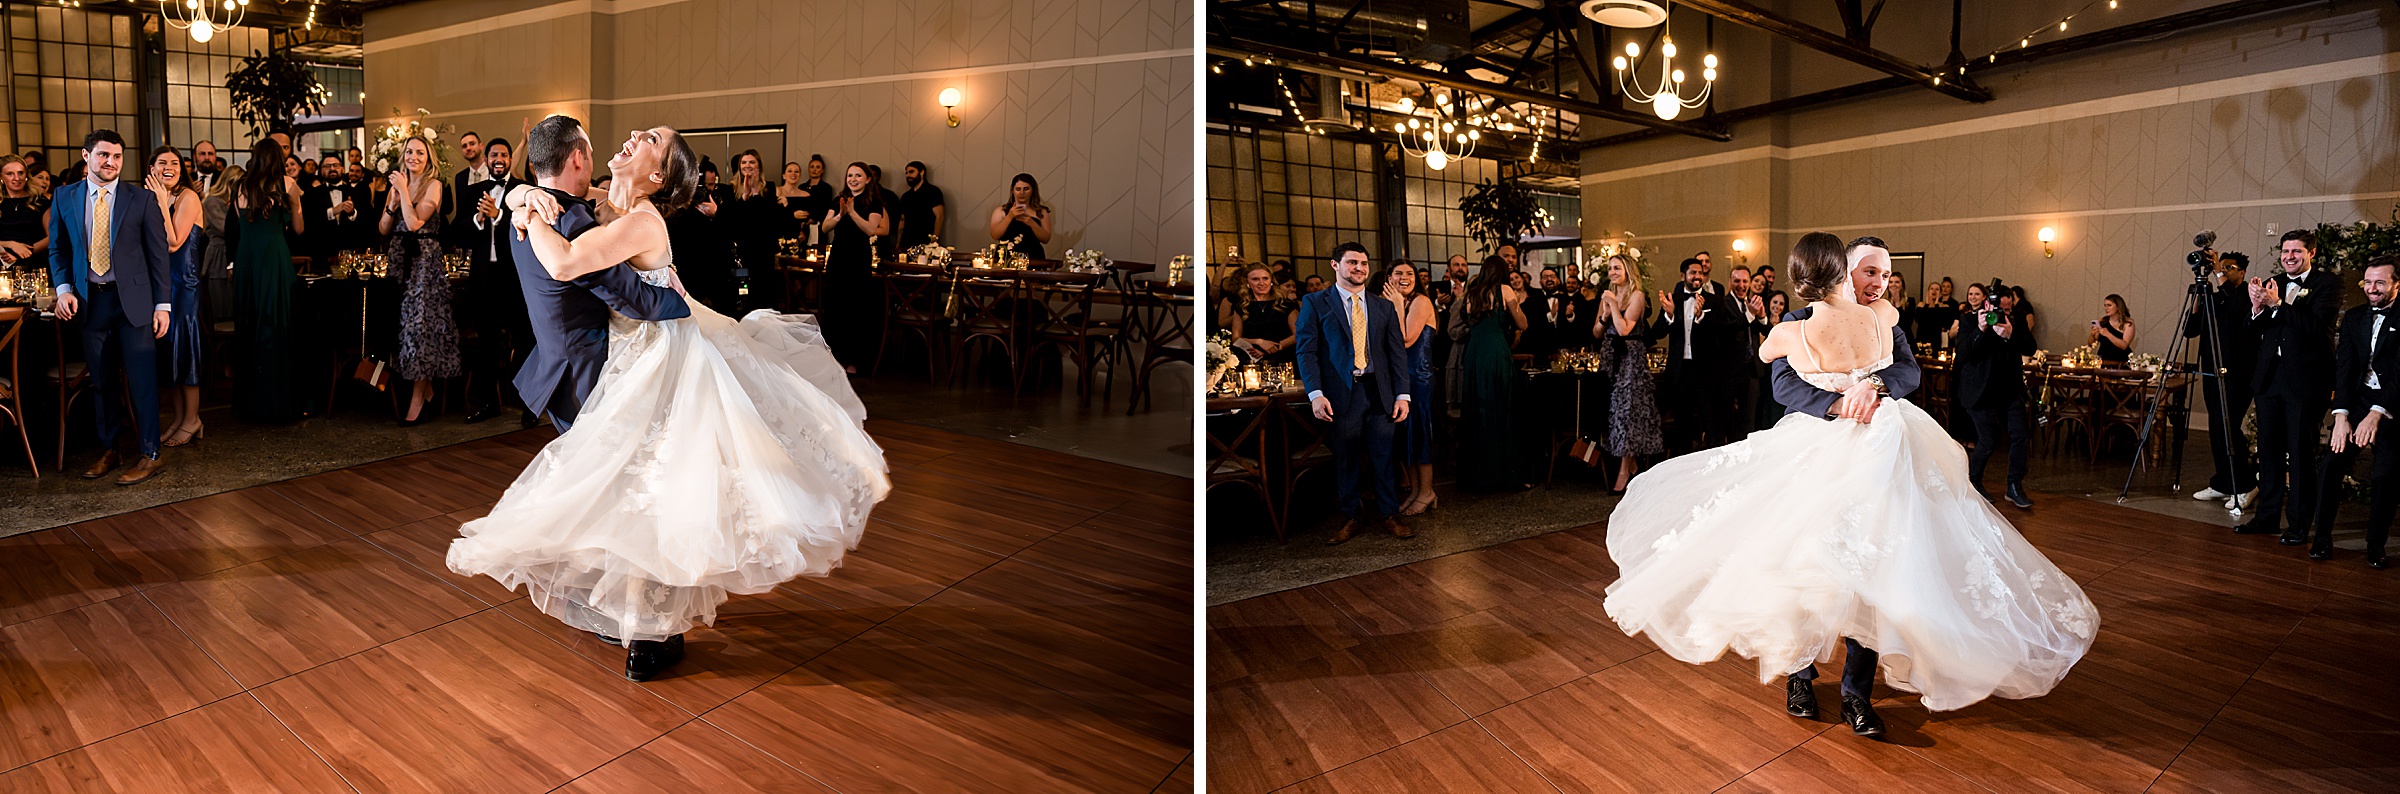 At a Lilah Events wedding, the bride and groom joyfully dance at their reception.